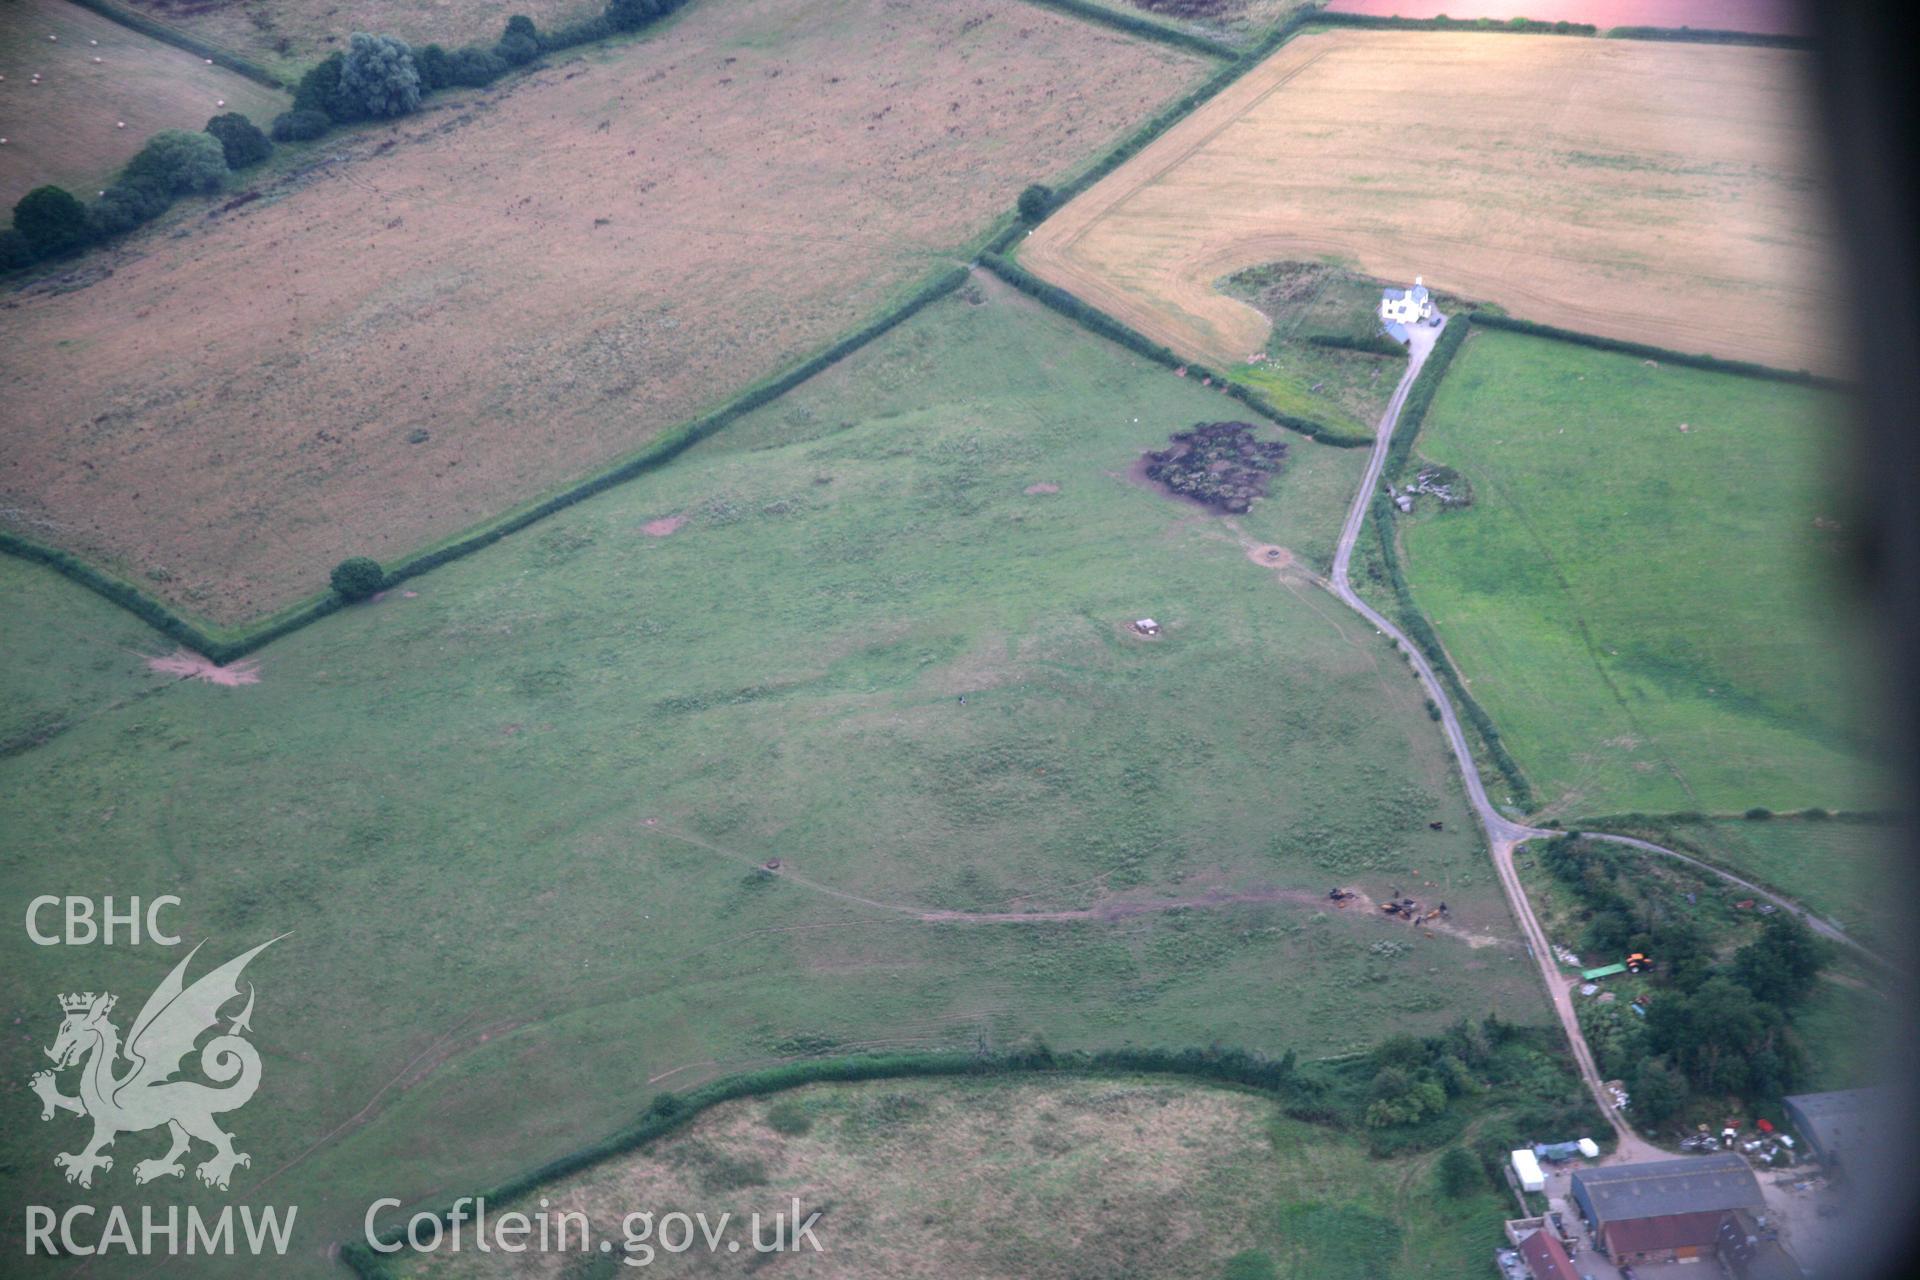 RCAHMW colour oblique aerial photograph of siege earthworks north-east of Raglan Castle. Taken on 05 August 2006 by Toby Driver